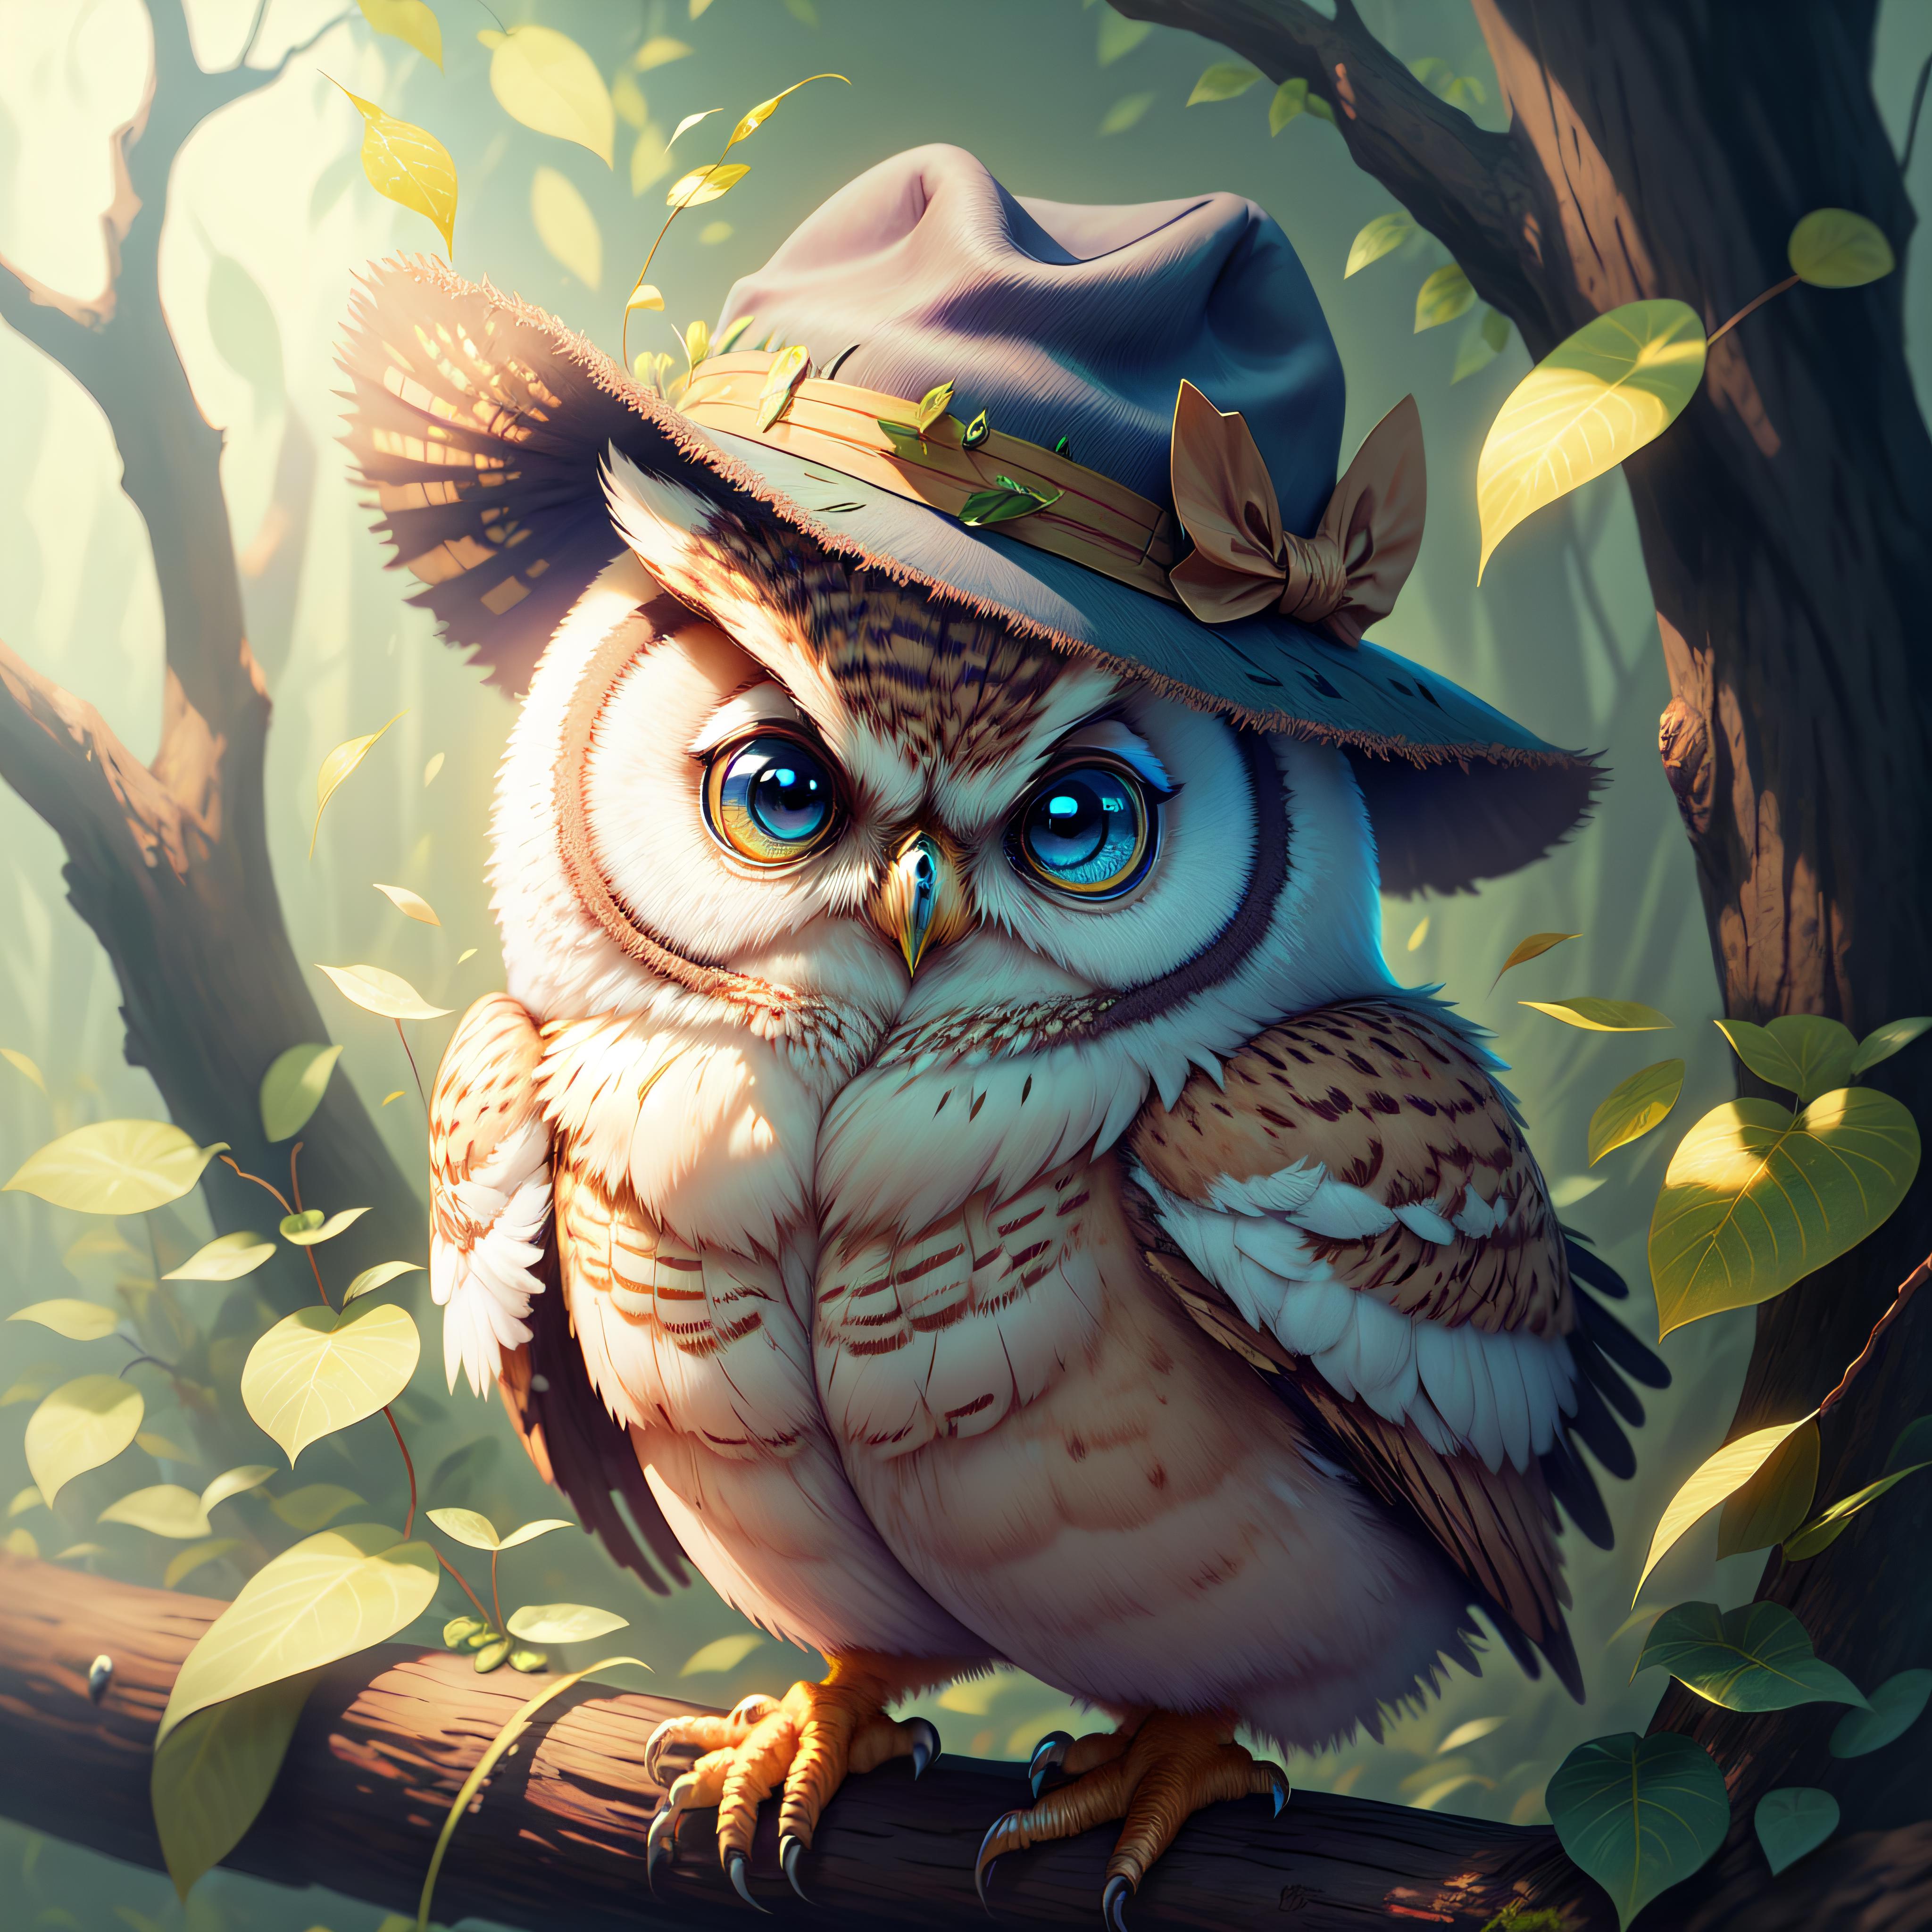 A brown and white owl wearing a hat and sitting on a tree branch.